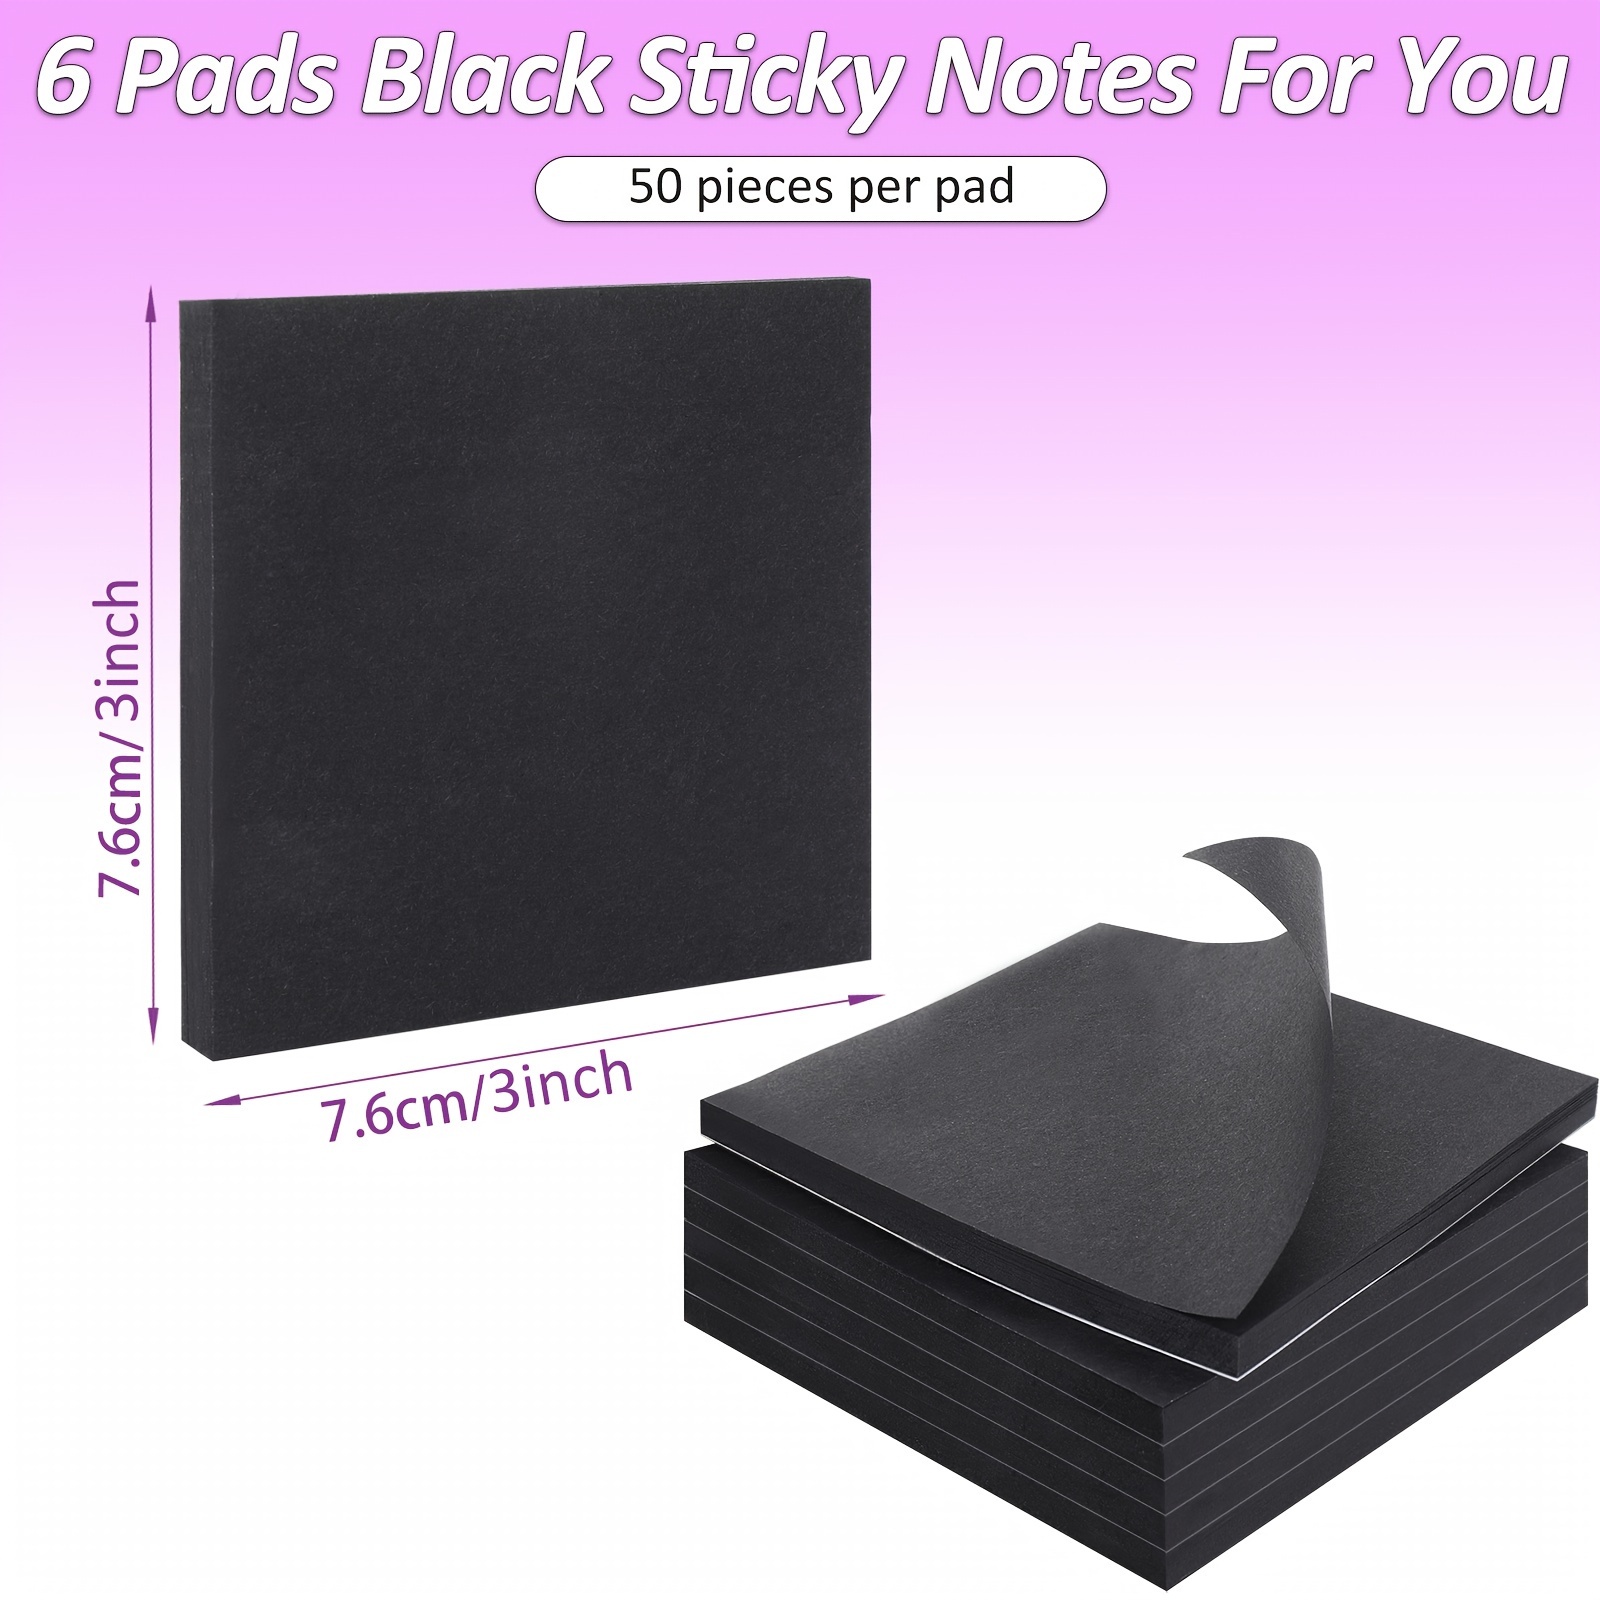 50 Sheets Black Sticky Notes Self-stick Notes Pads Easy Post Notes